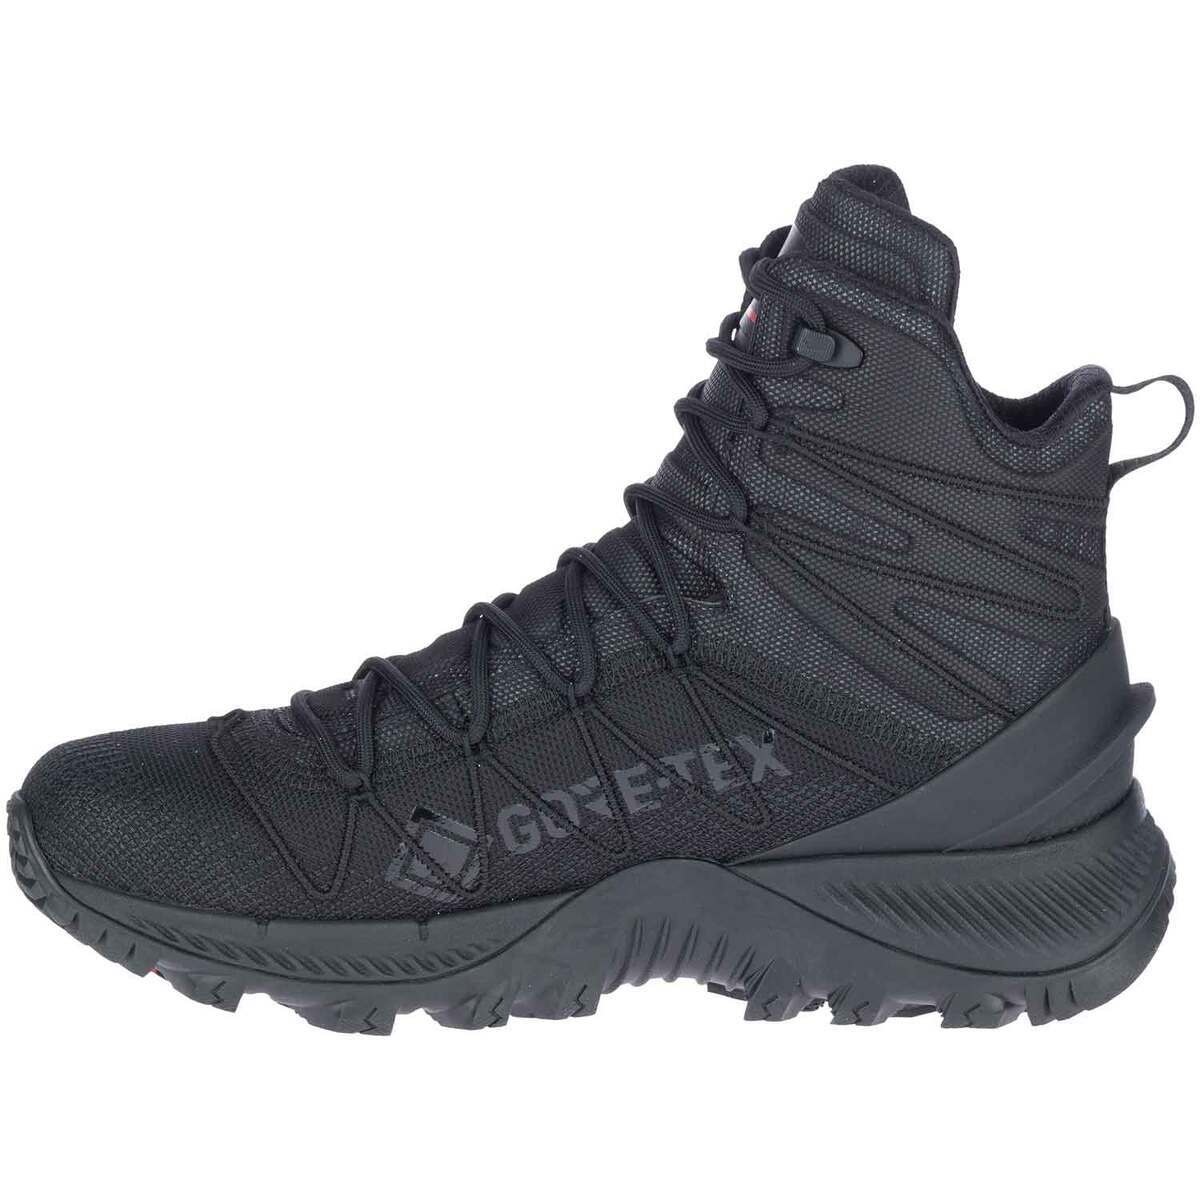 Merrell Men's Thermo Rogue 3 Waterproof Mid Hiking Boots - Black - Size ...